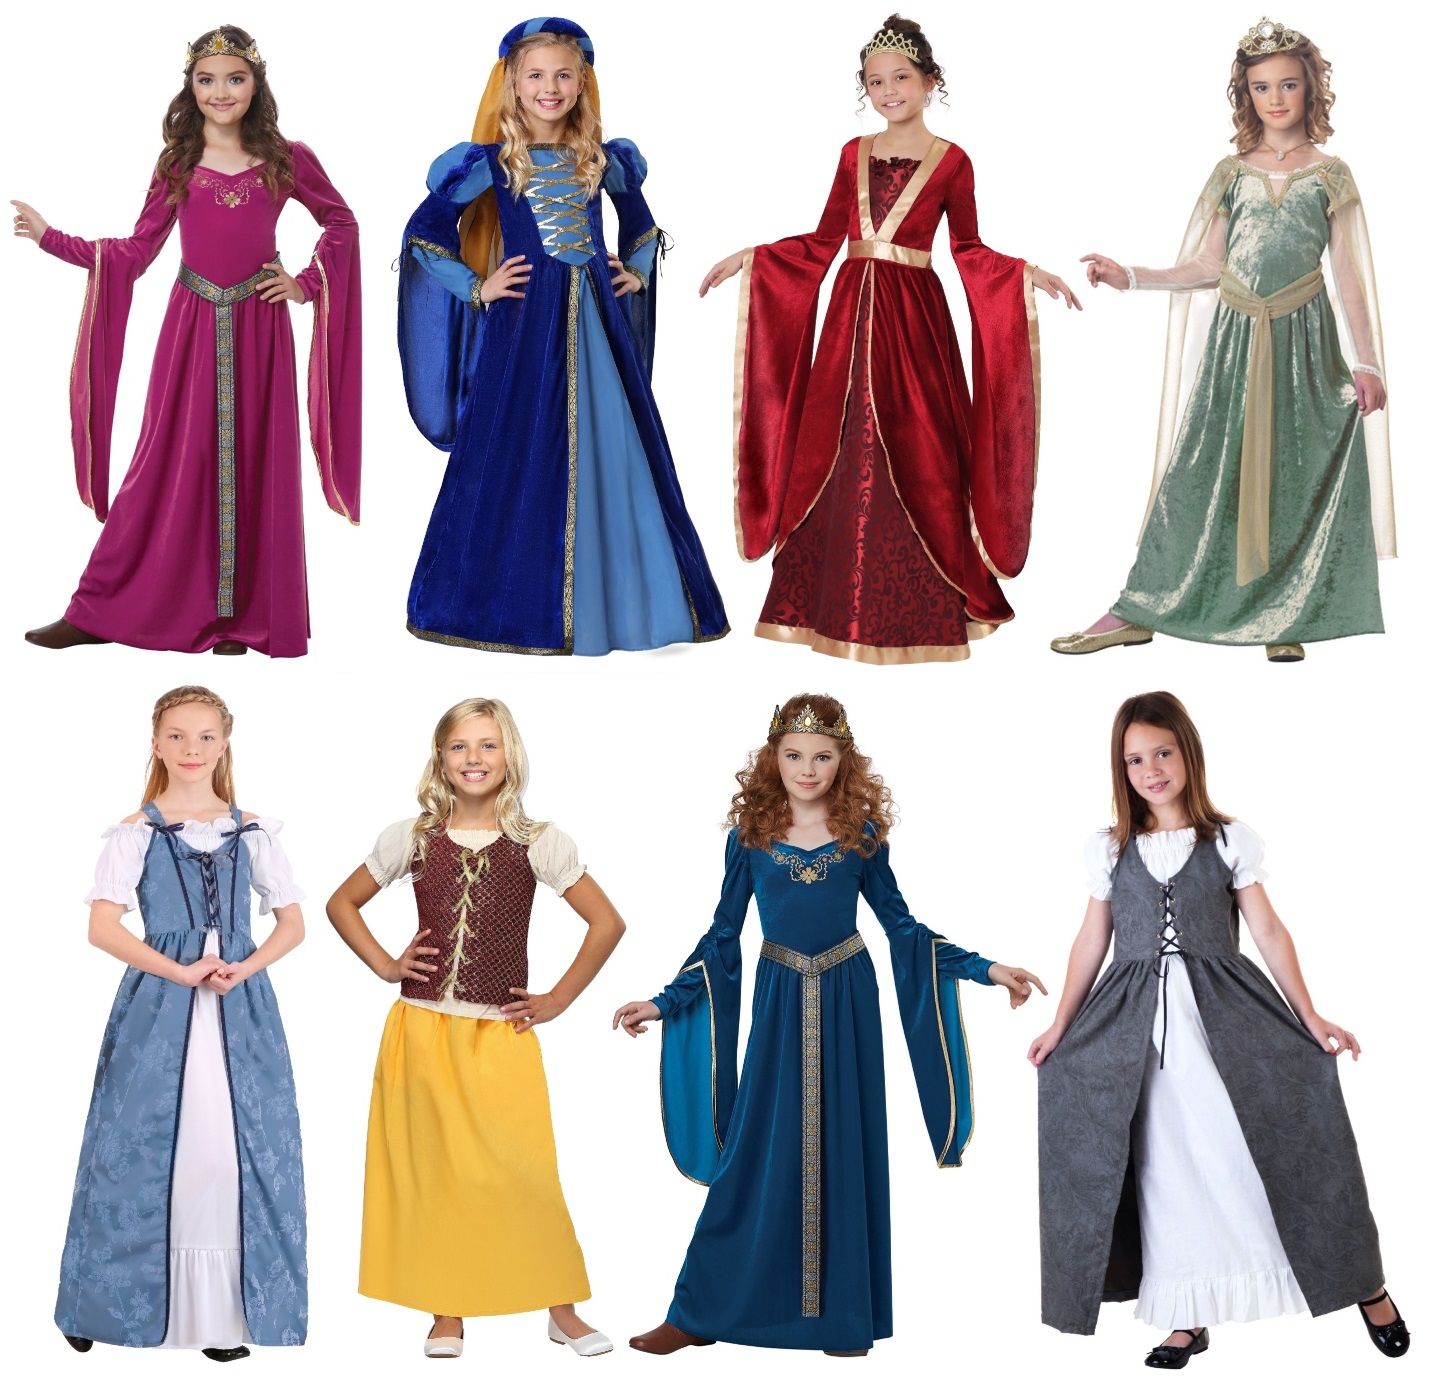 Going to the Renaissance Faire? How to score that wench look